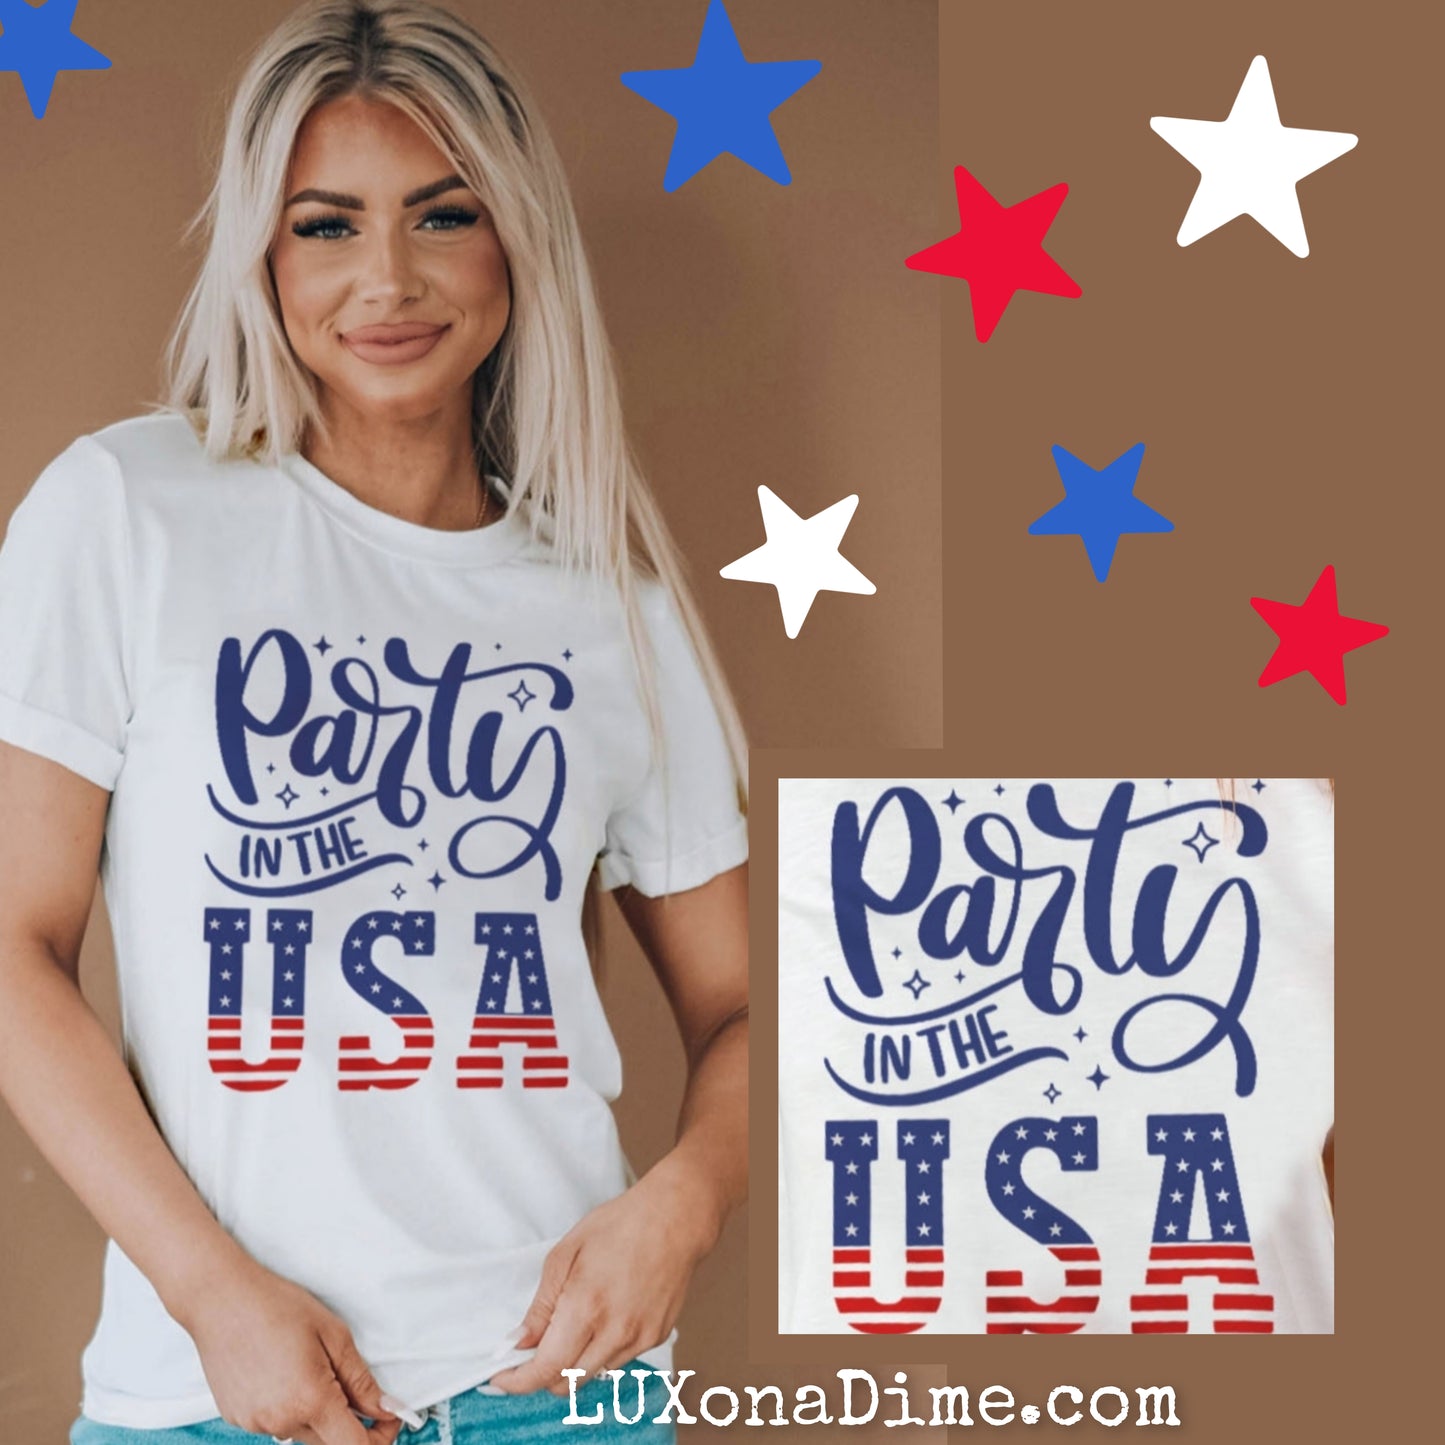 Woman's PARTY IN THE USA American Flag Graphic Cuffed Short Sleeve Tee Shirt (Plus Size Available)